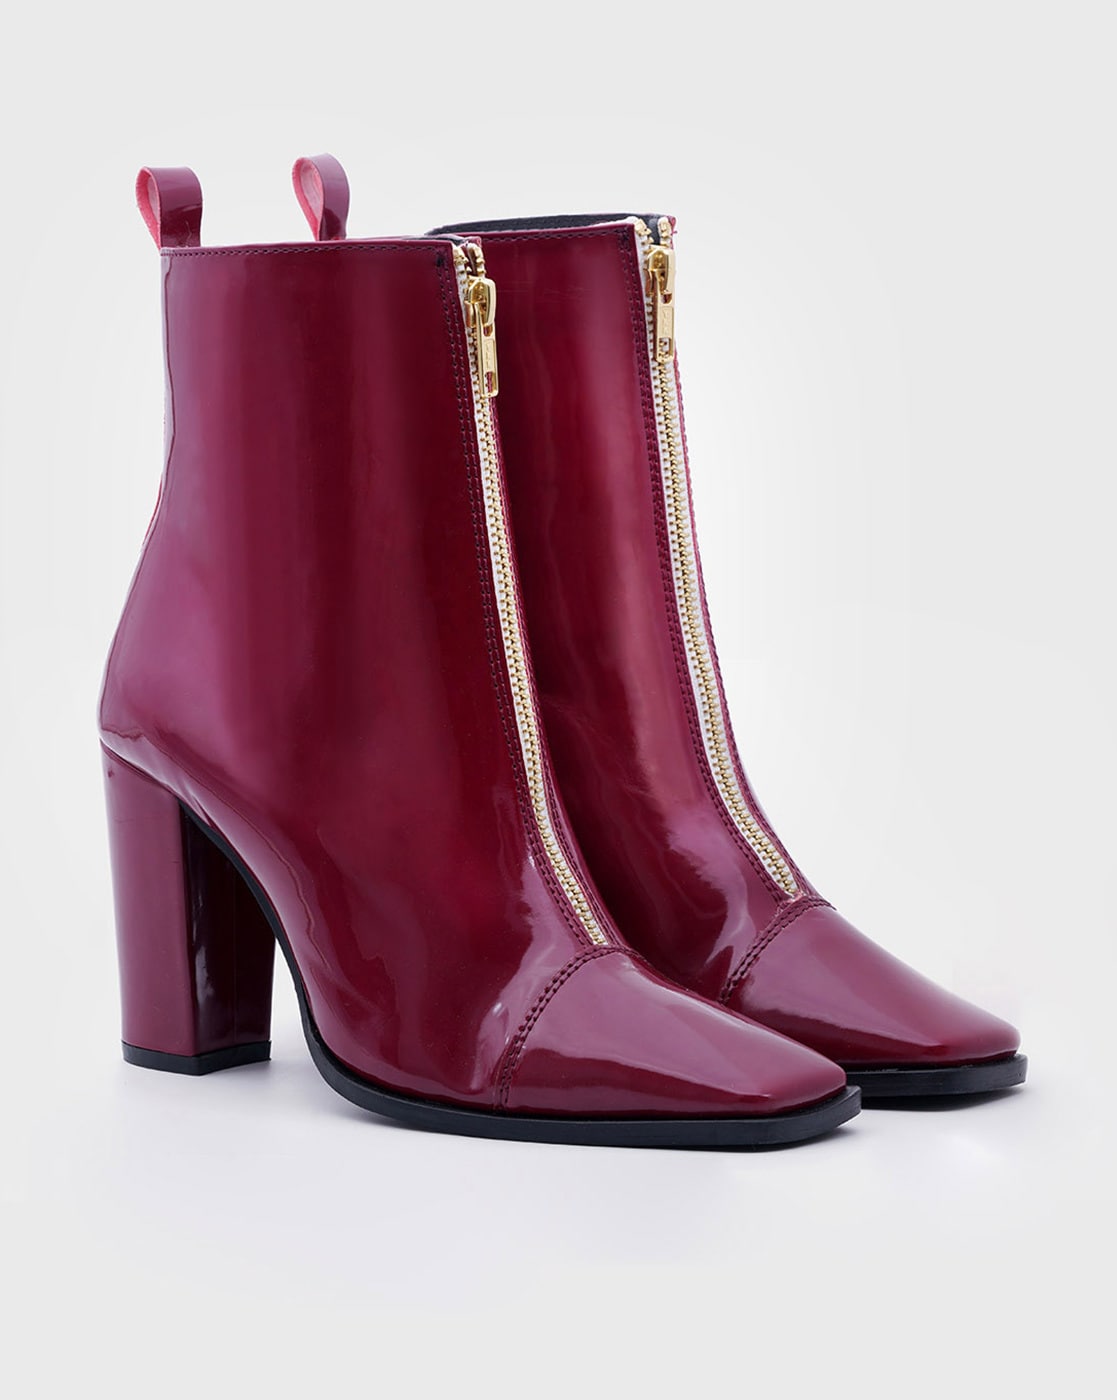 Maison Margiela Women's Tabi Rubber Ankle Boots in Red | LN-CC®